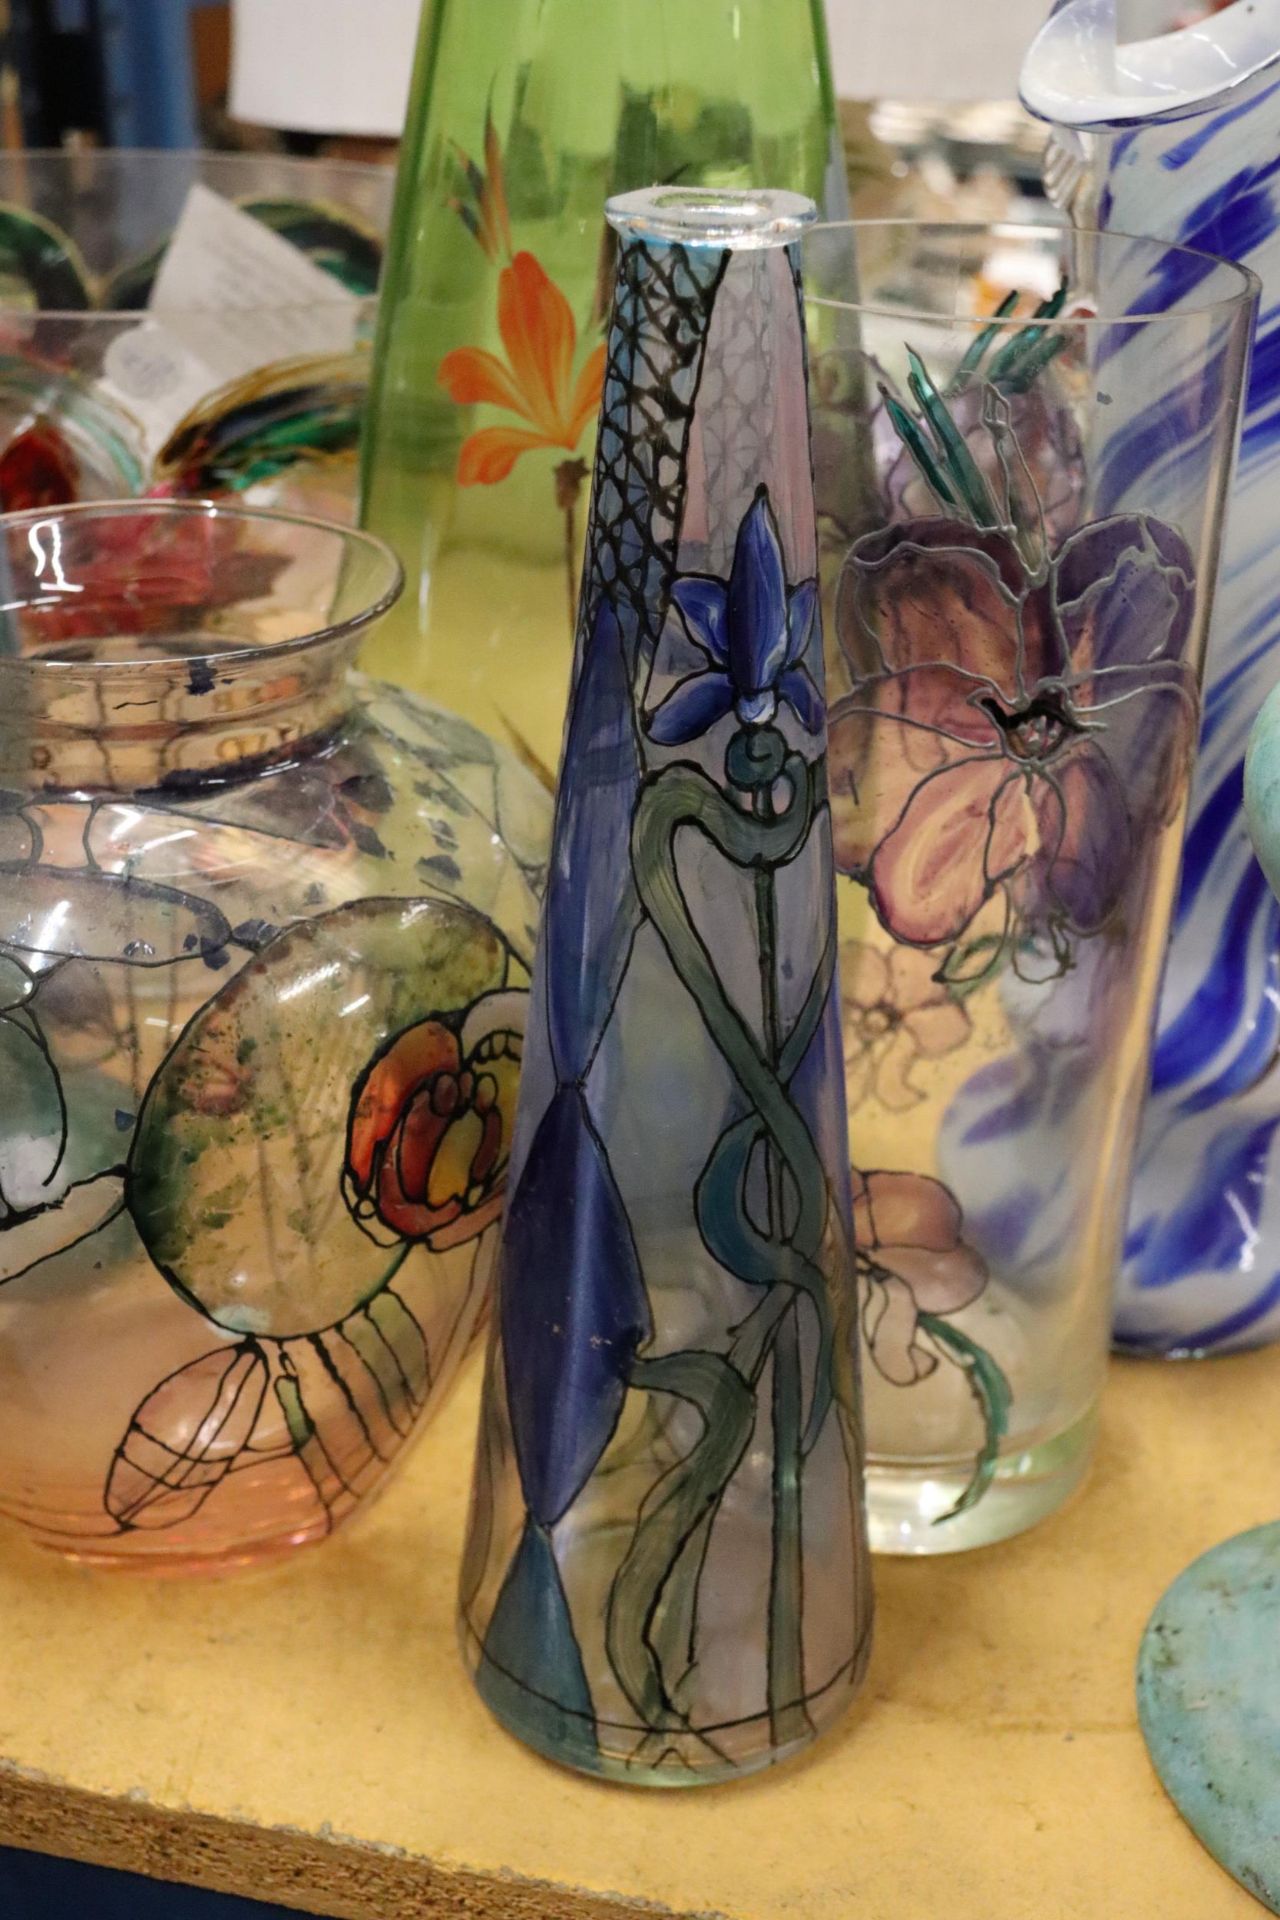 A LARGE MIXED LOT OF PAINTED ON GLASS VASES PLUS ONE DELCROFT WARE CERAMIC VASE - Image 4 of 11